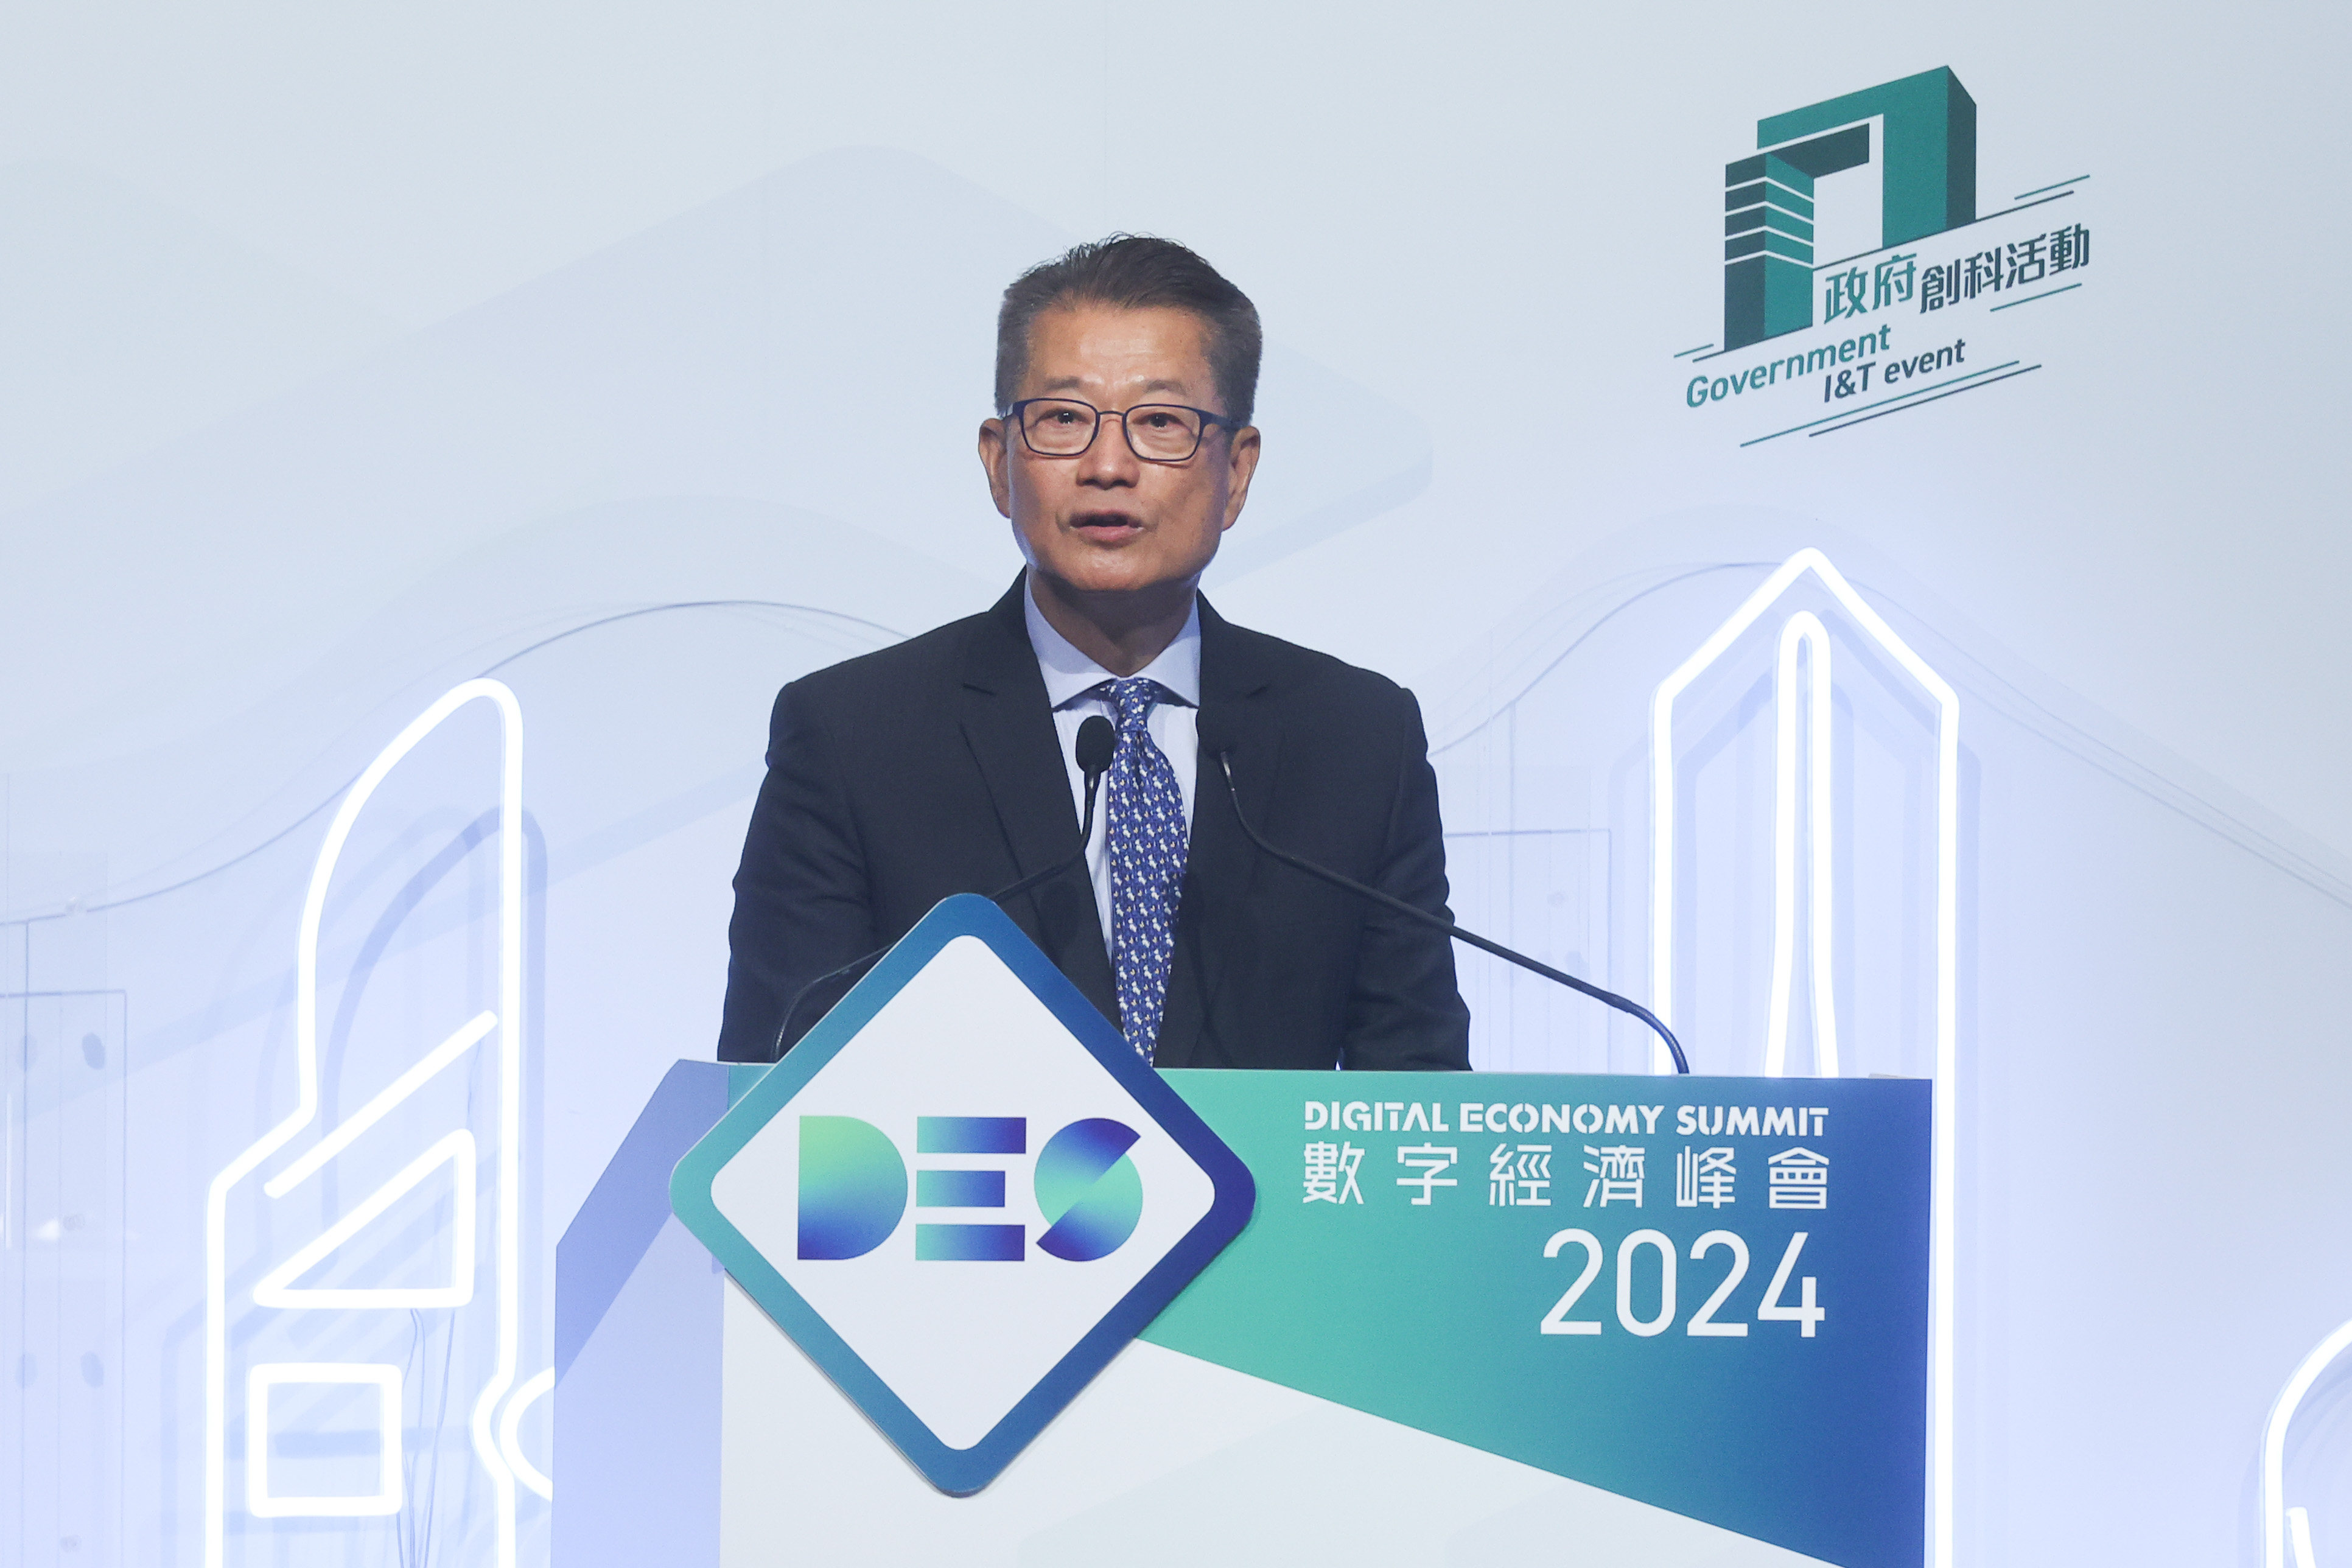 At the recent Digital Economy Summit, Financial Secretary Paul Chan Mo-po spelled out the city’s plan to digitalise the local economy and make the city  more electronically connected to the mainland. Photo: SCMP / Edmond So